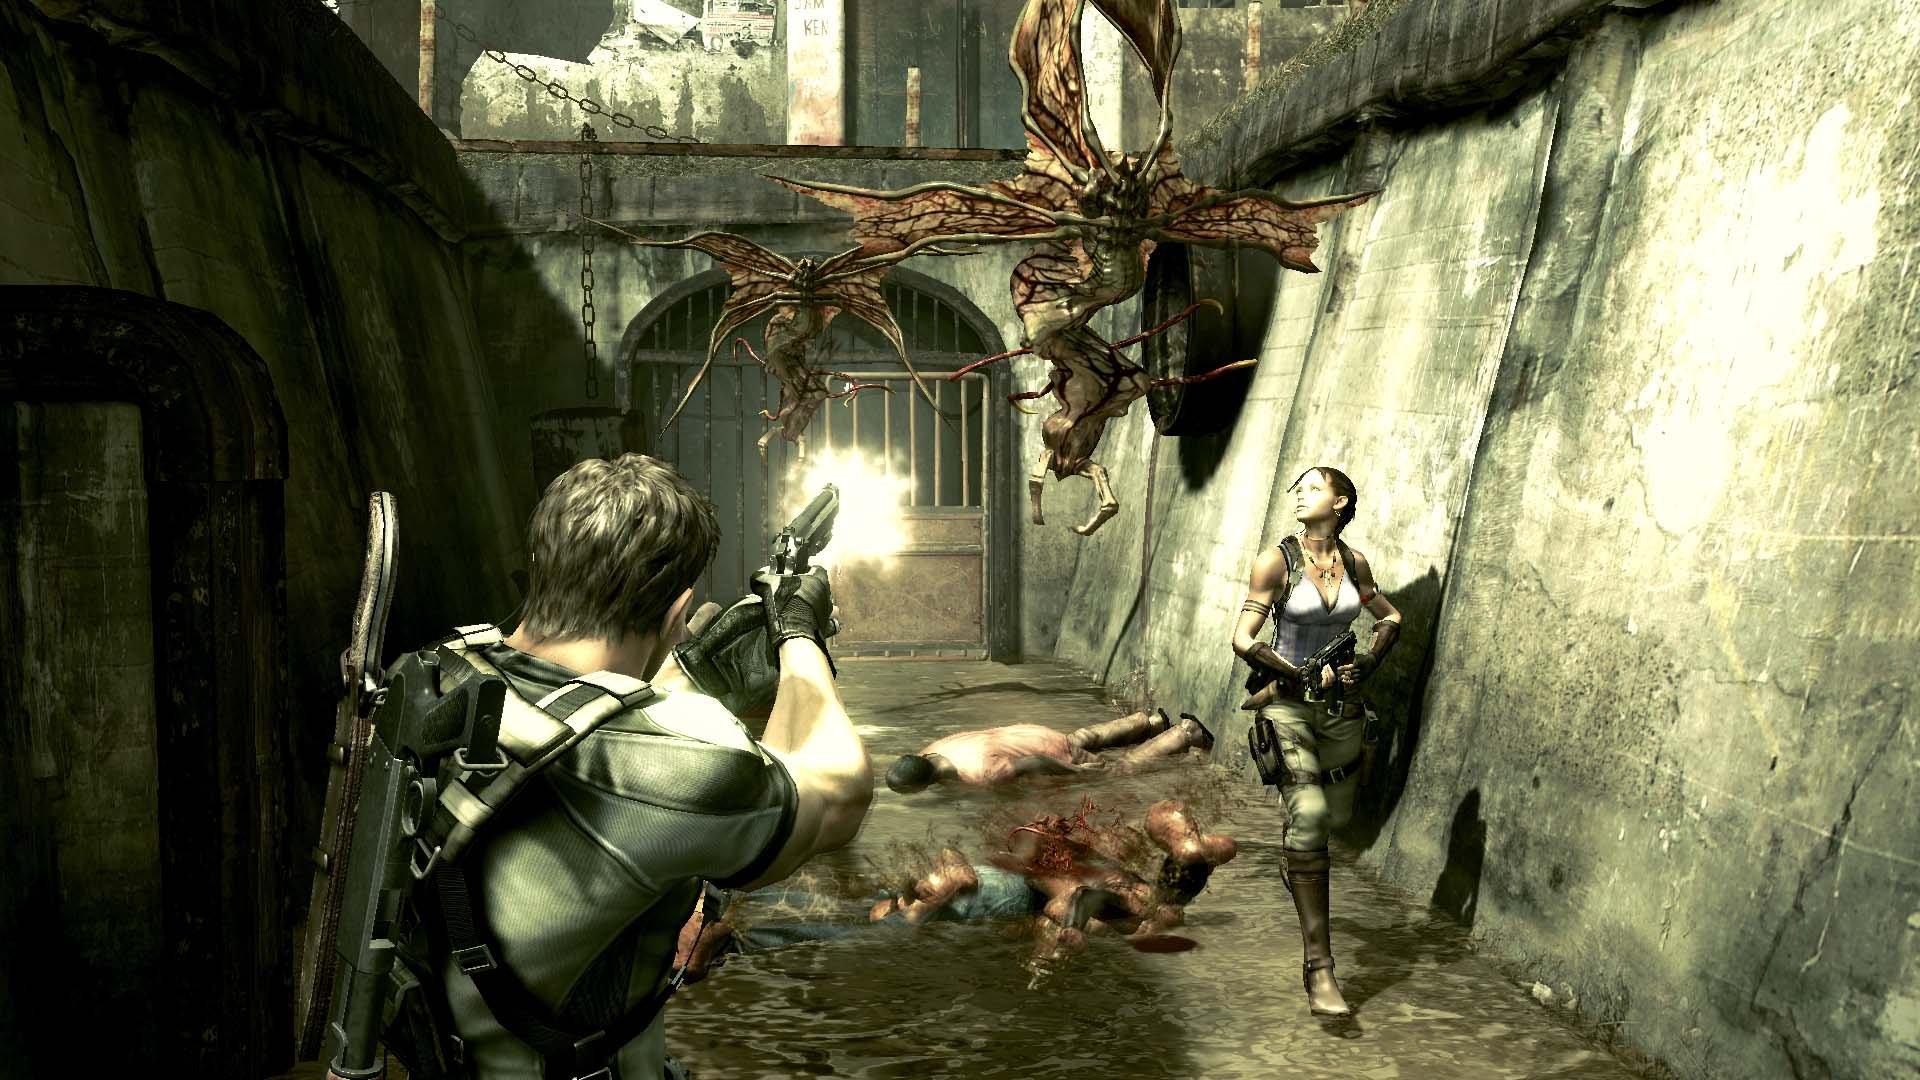 Resident Evil 5 for PS4, Xbox One arrives at the end of June - Polygon